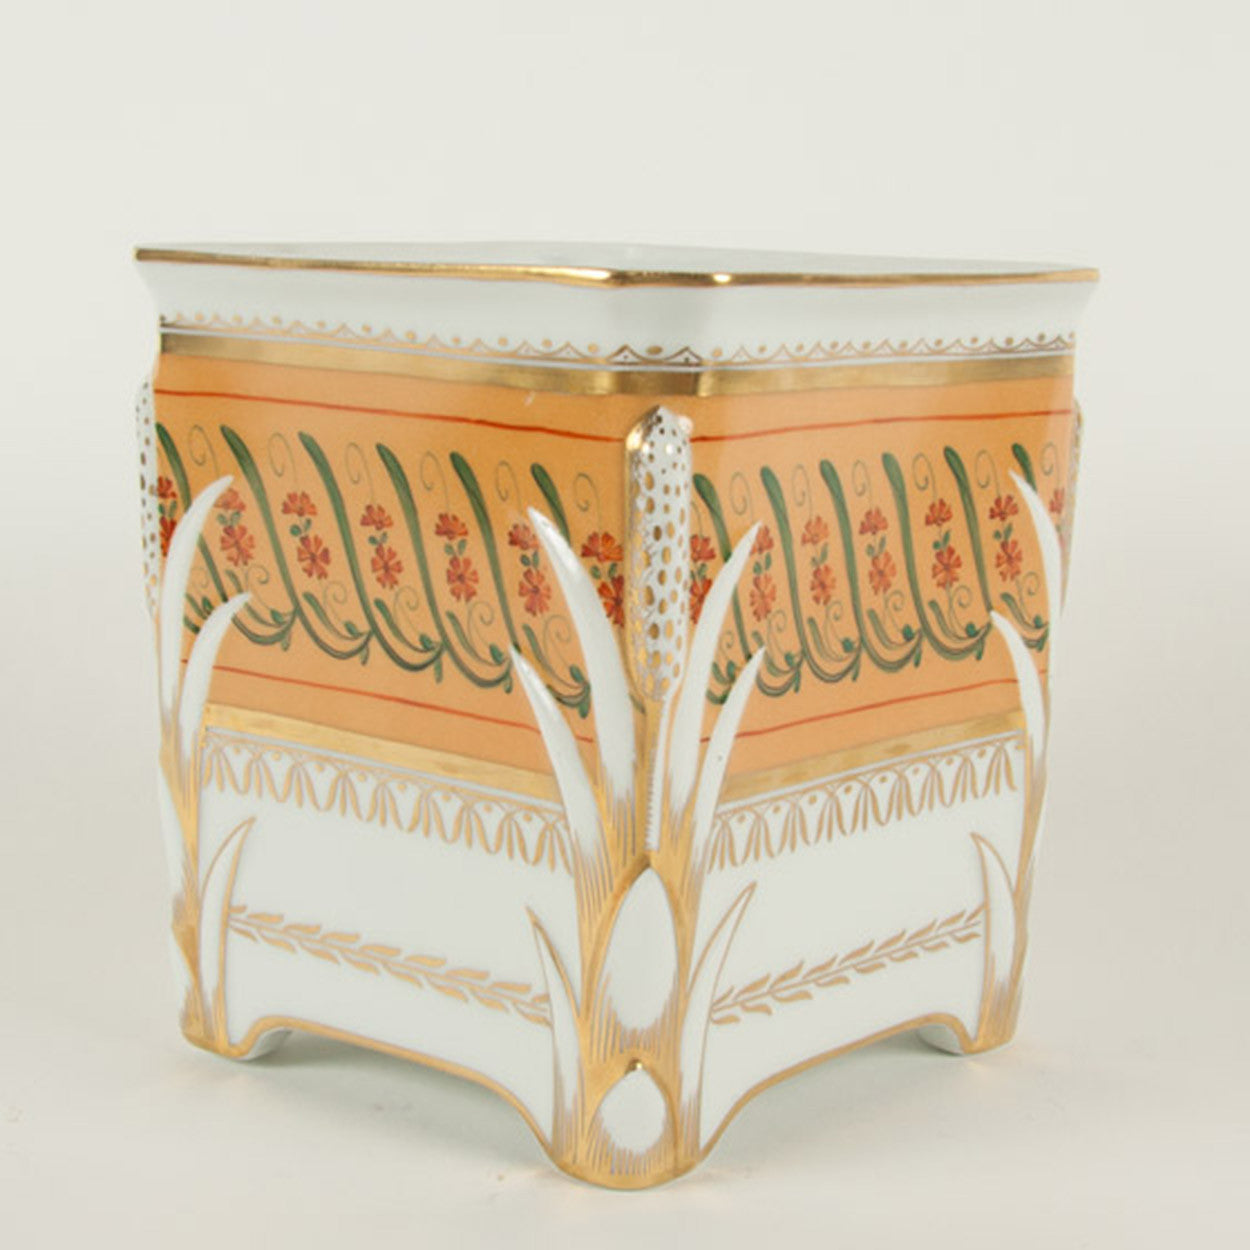 A Porcelain Directoire Style Cachepot by Le Tallec for Tiffany & CO.